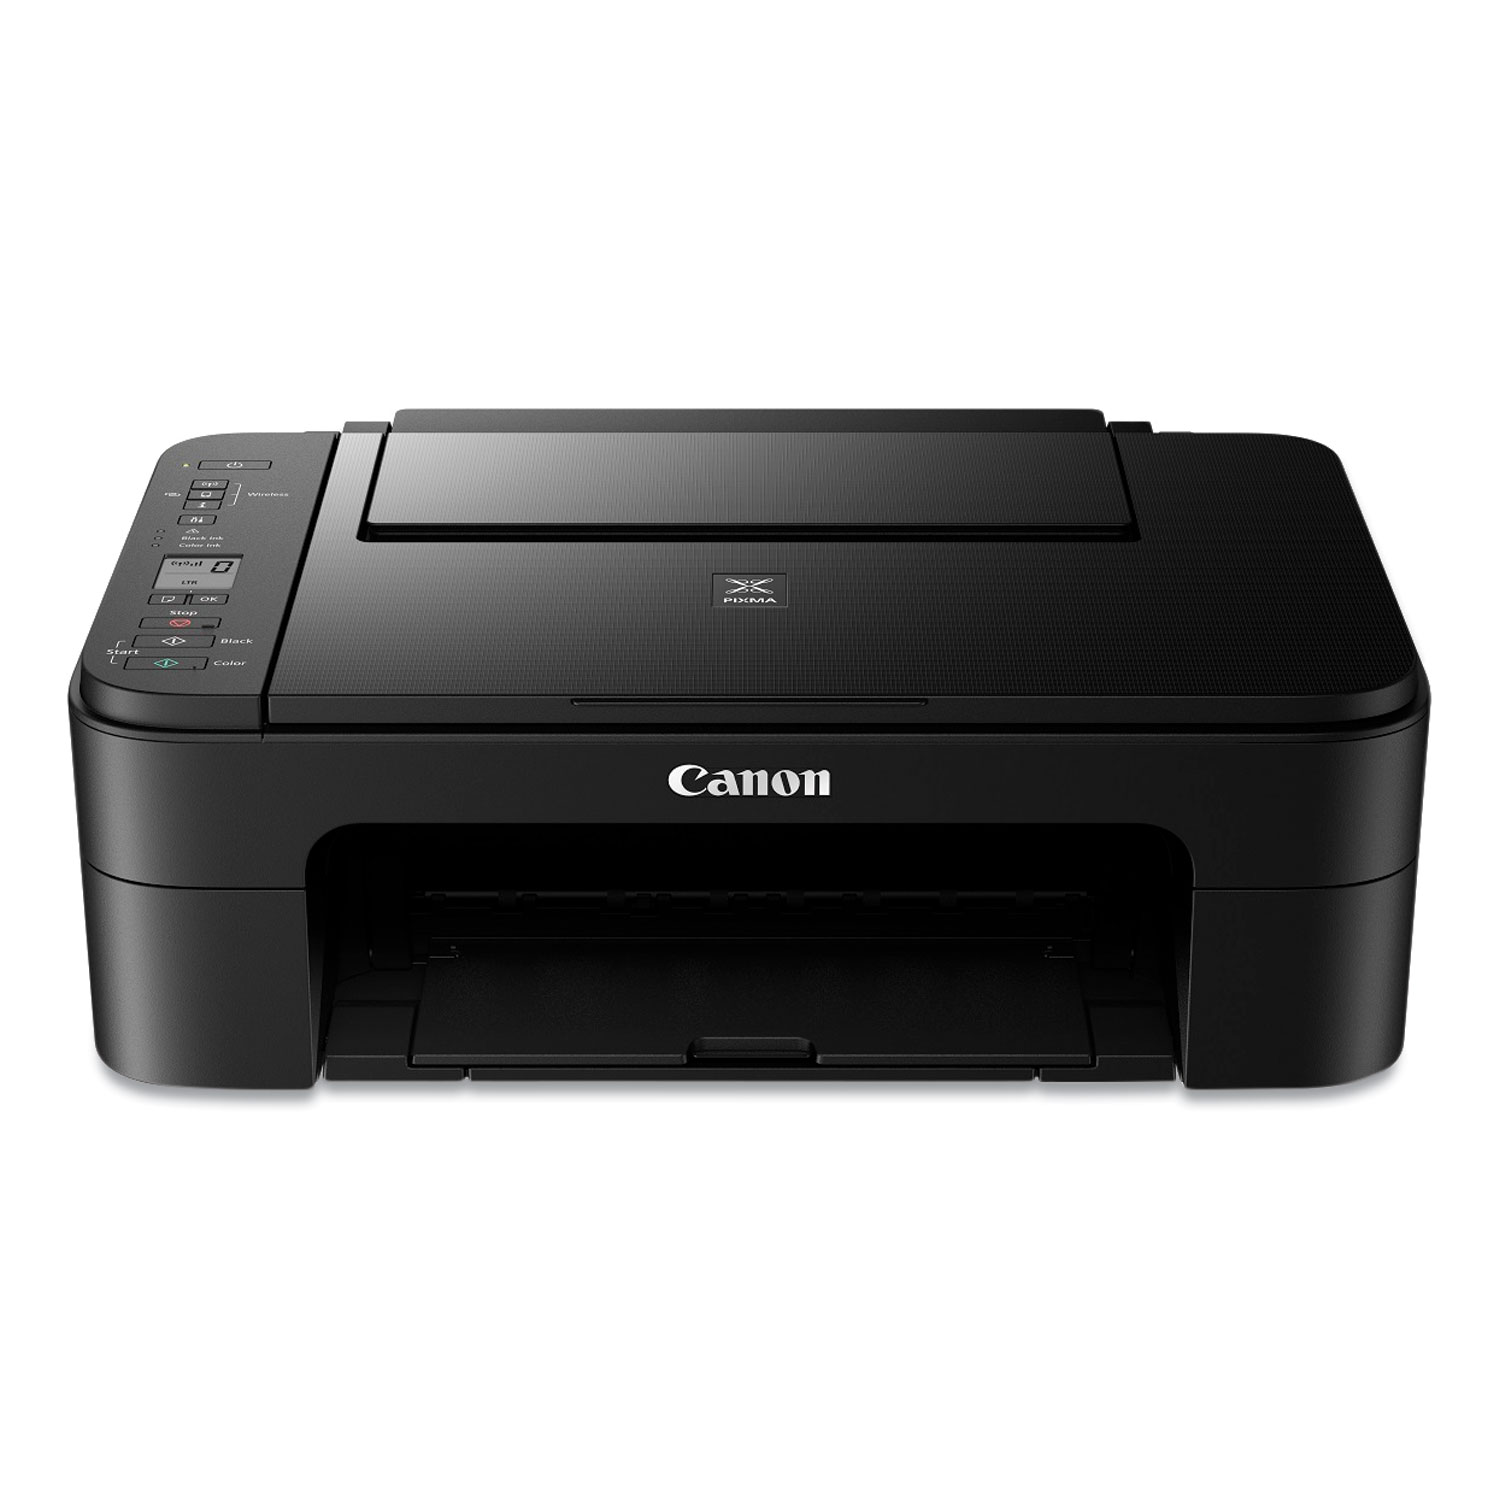  Canon 3771C002 PIXMA TS3320 Wireless Inkjet All-in-One Printer, Copy/Print/Scan (CNMTS3320) 